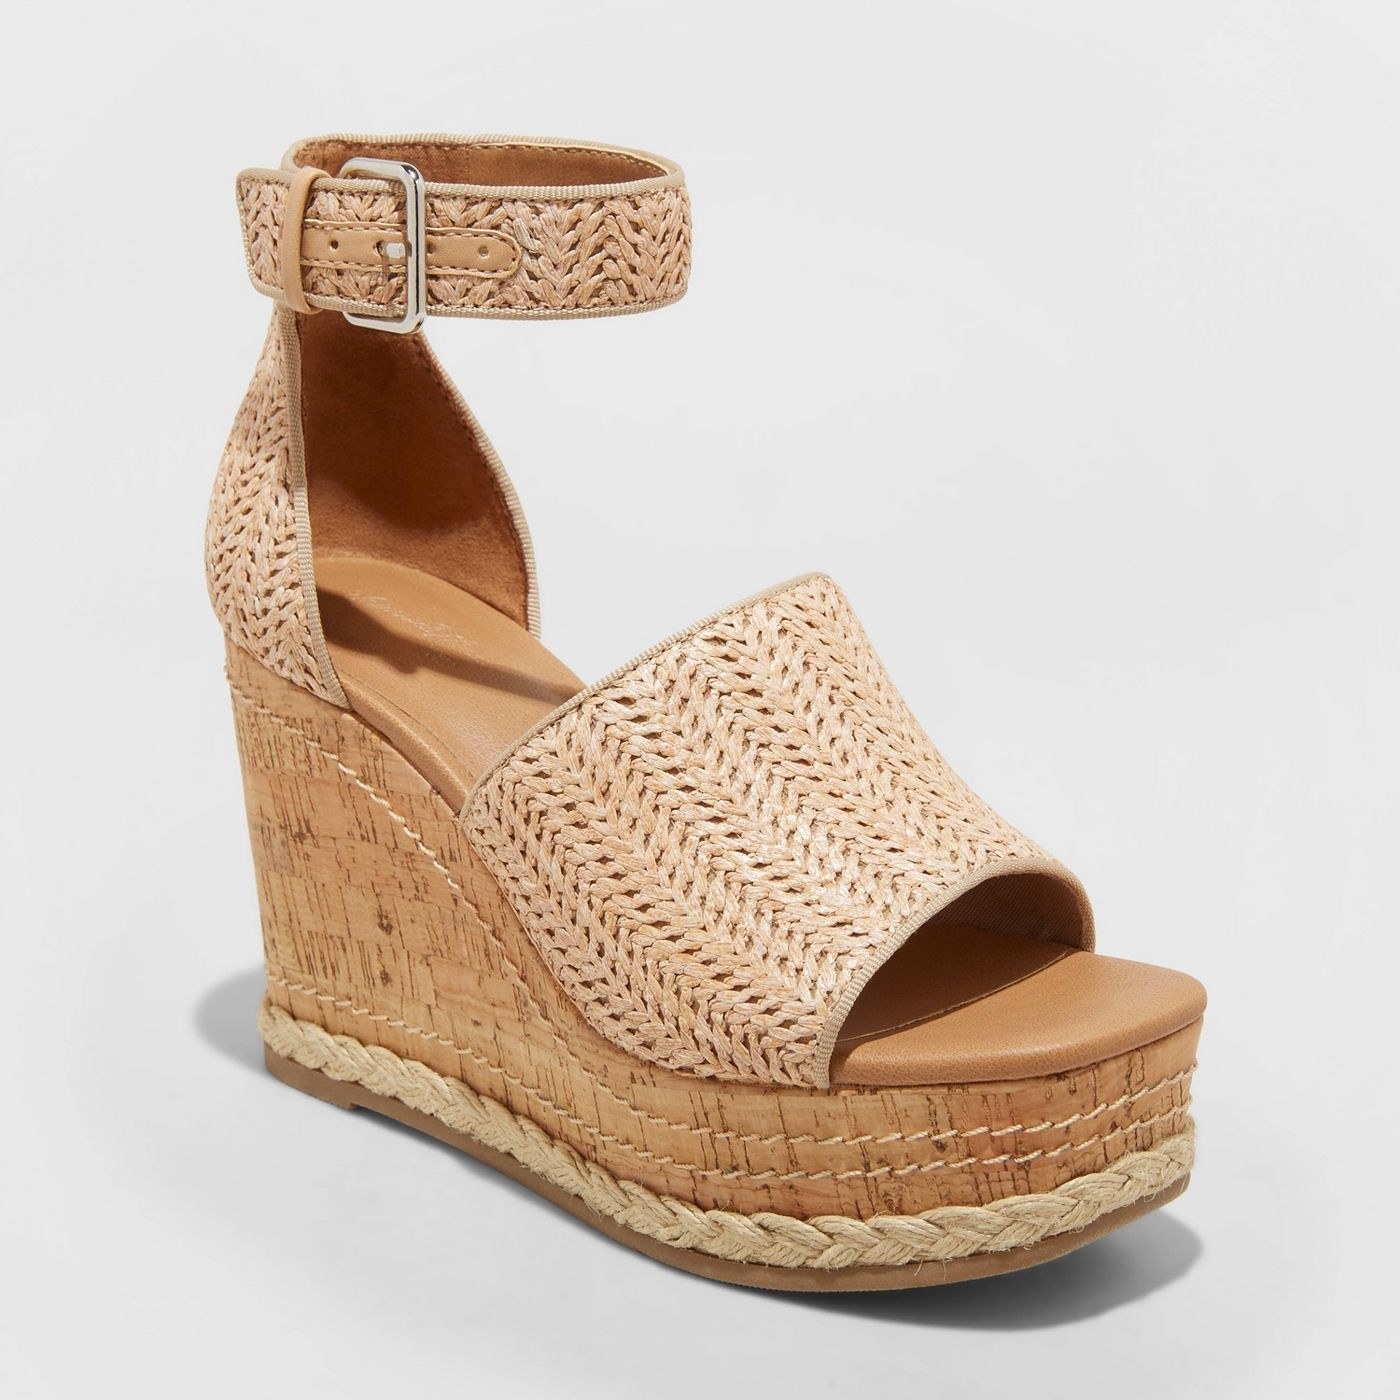 Wedges with braided detailing and stitching on sole, tan colored straps and camel sole